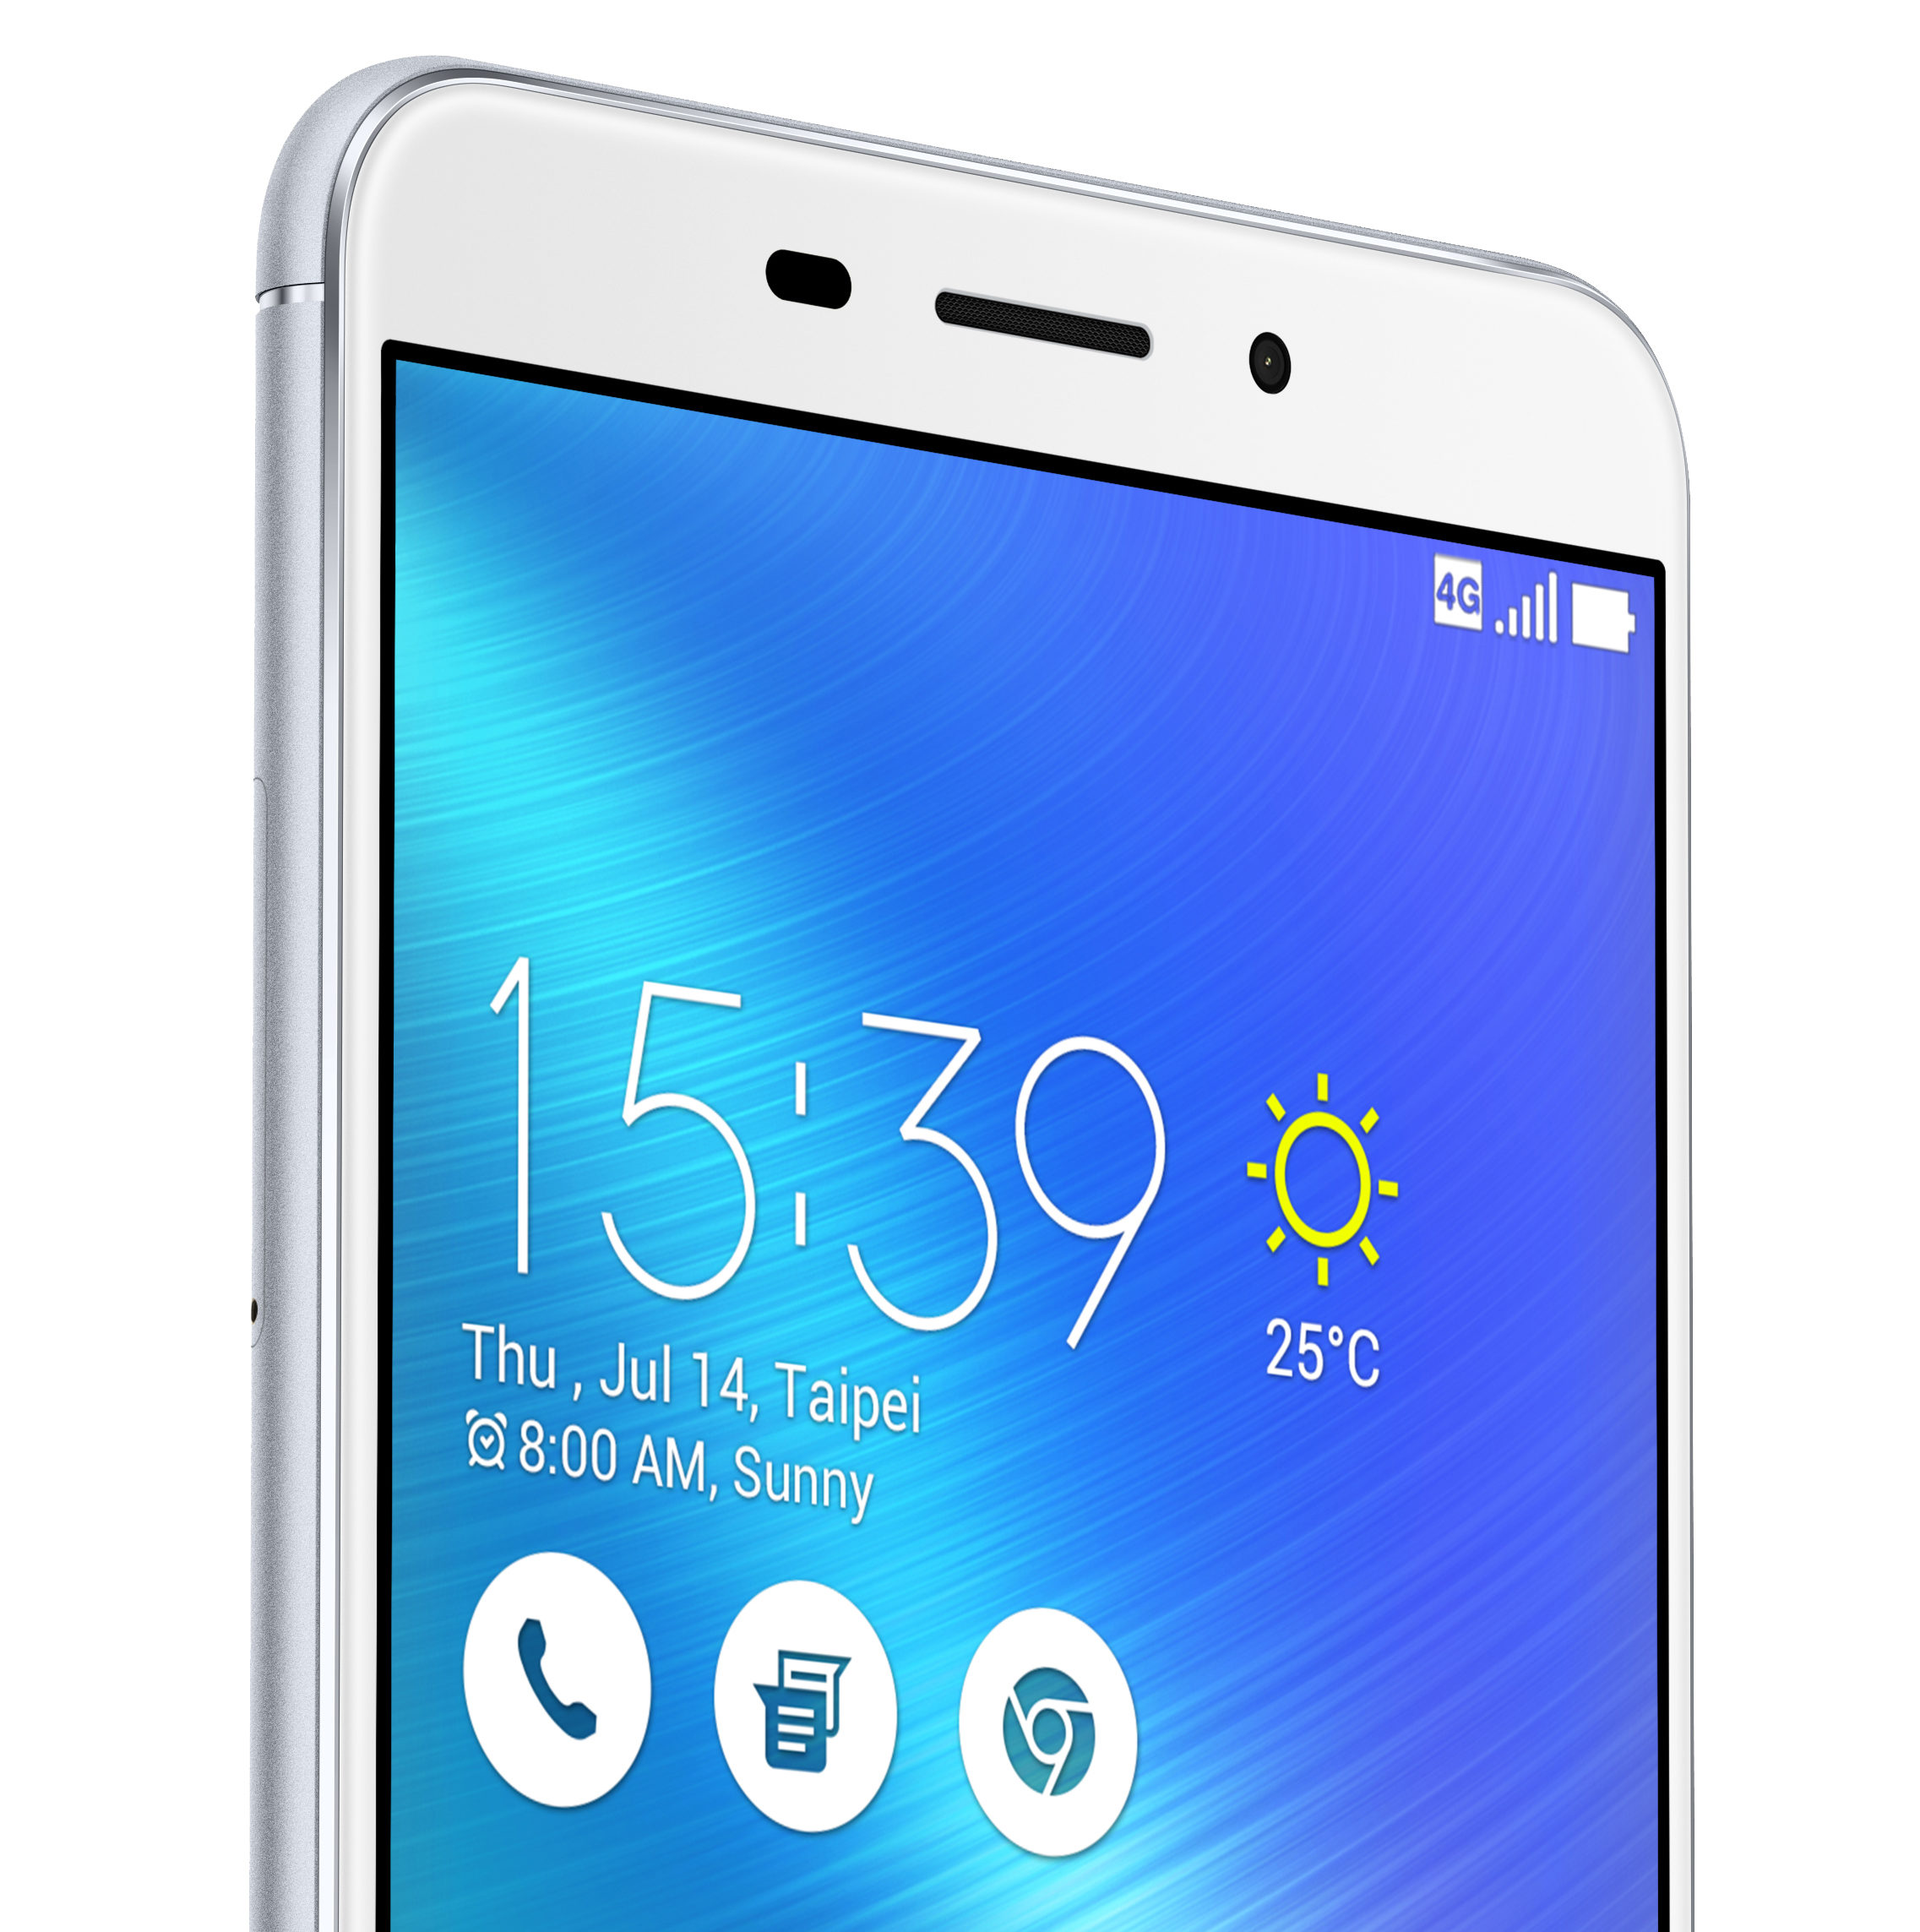 Asus Zenfone 3 Laser Zc551kl Goes For Sale In India At Rs 18999